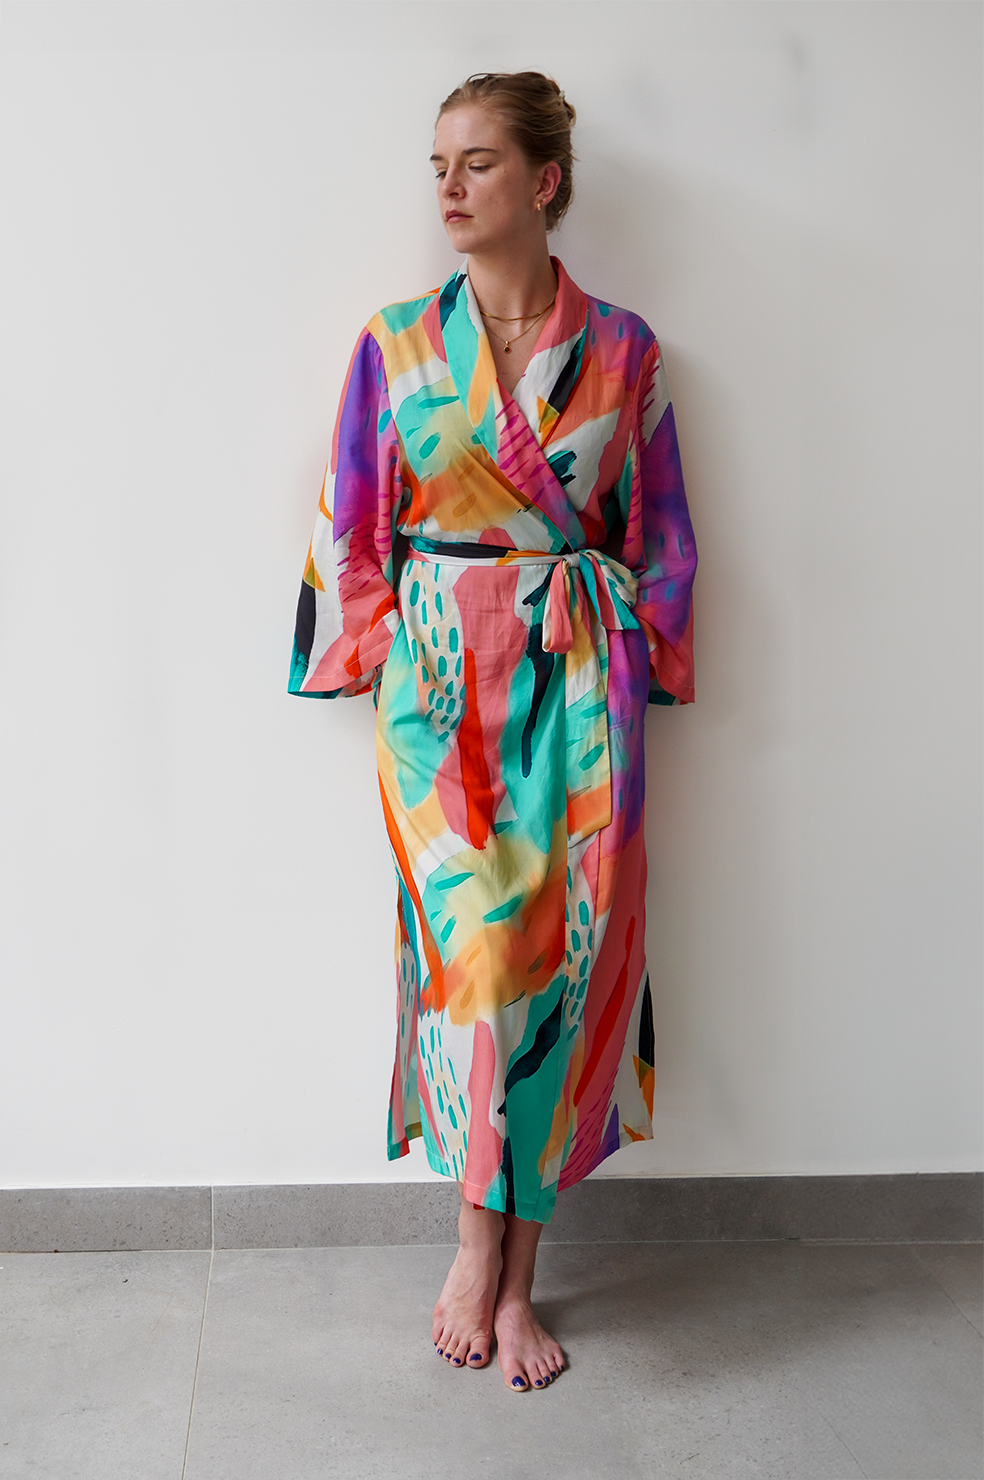 Sustainable luxury silk-like dressing gown made from Tencel Modal fabric. This is a soft and breathable fabric which drapes beautifully. Model is in a size medium 